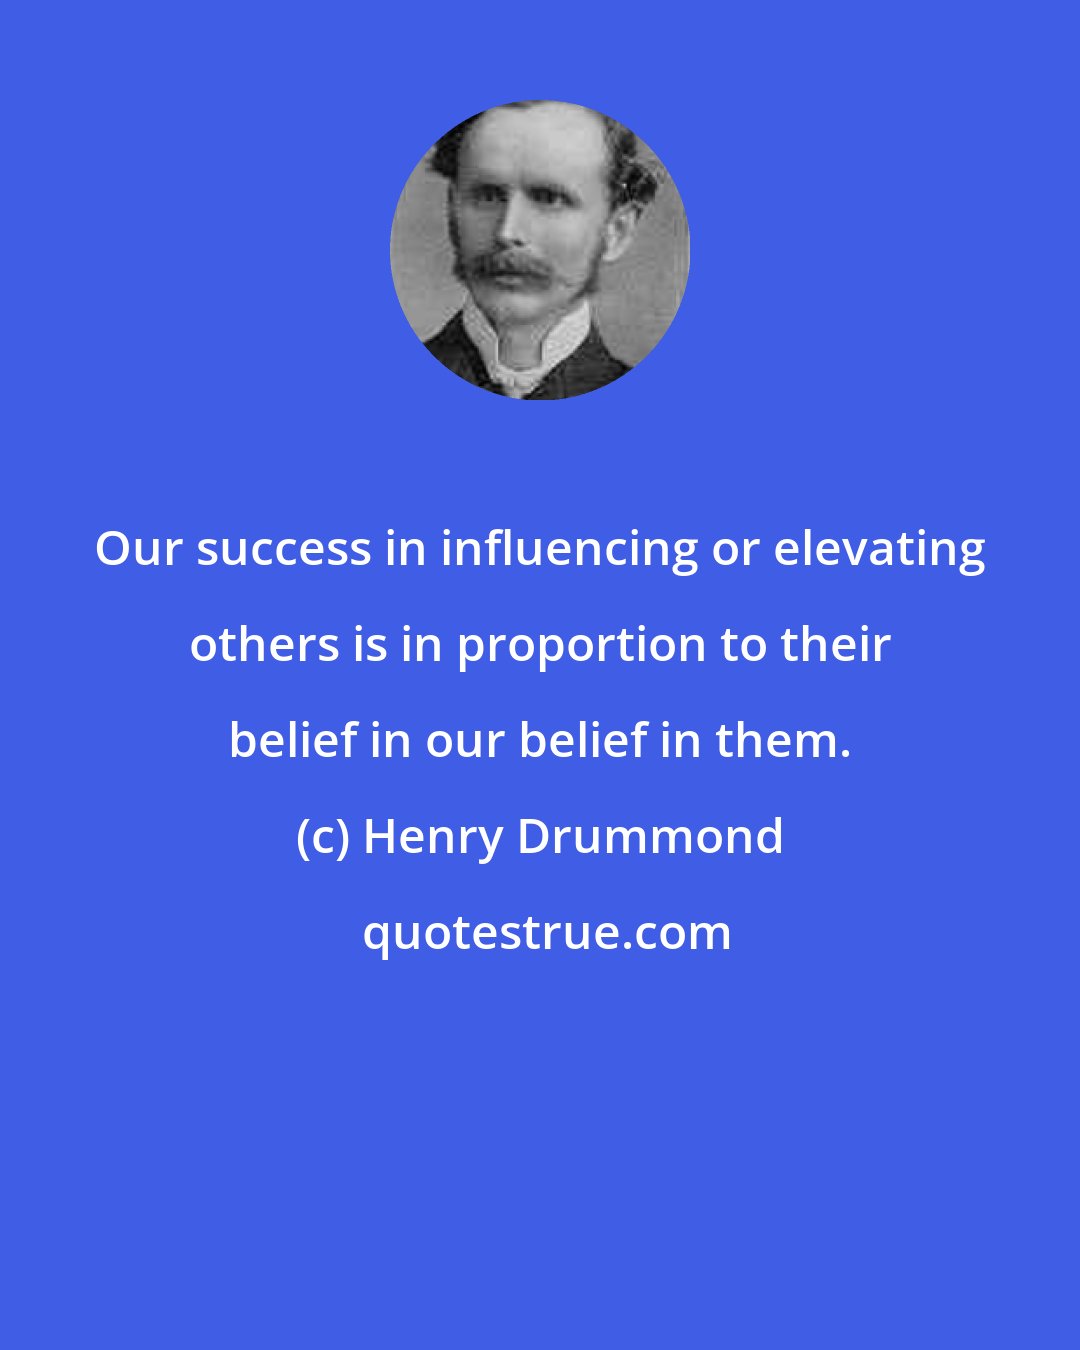 Henry Drummond: Our success in influencing or elevating others is in proportion to their belief in our belief in them.